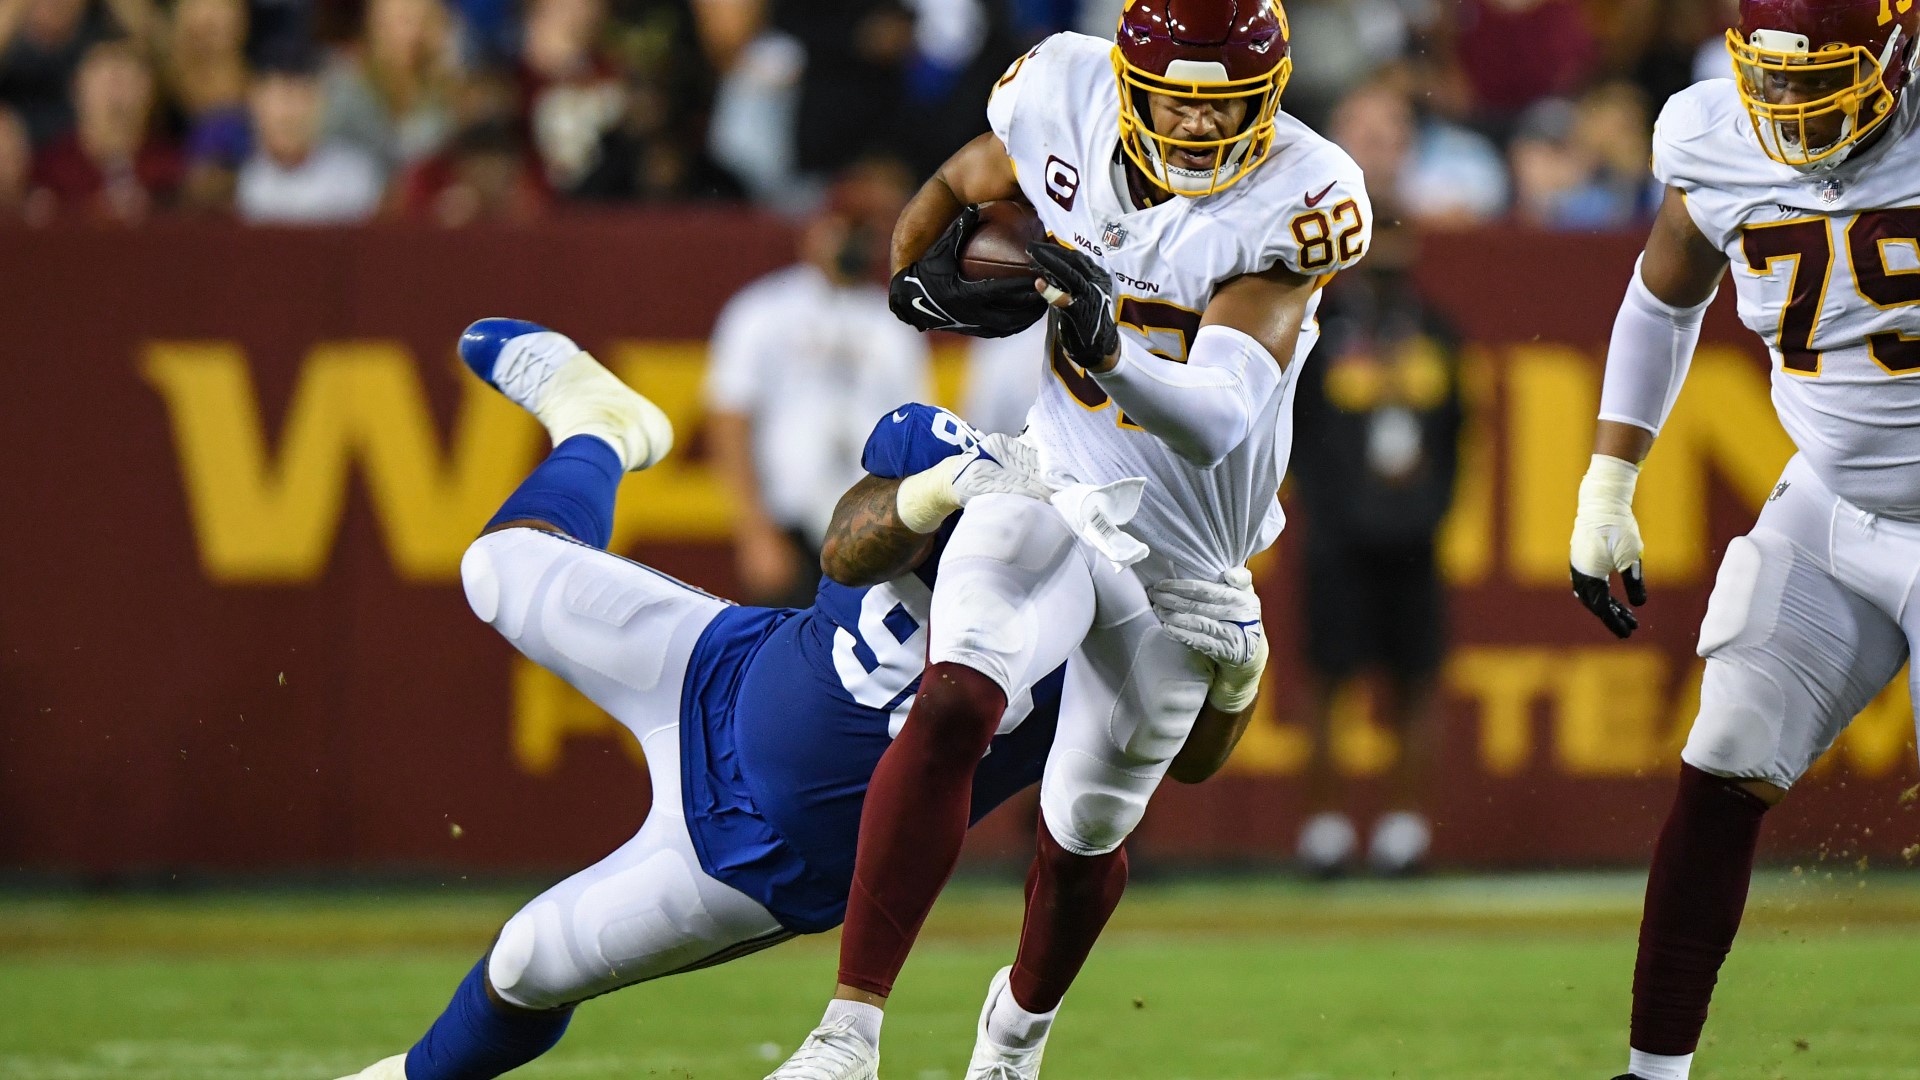 Chris Russell of your Locked On Washington Football Team Podcast breaks down the KEYS TO VICTORY for the Burgundy and Gold this week.